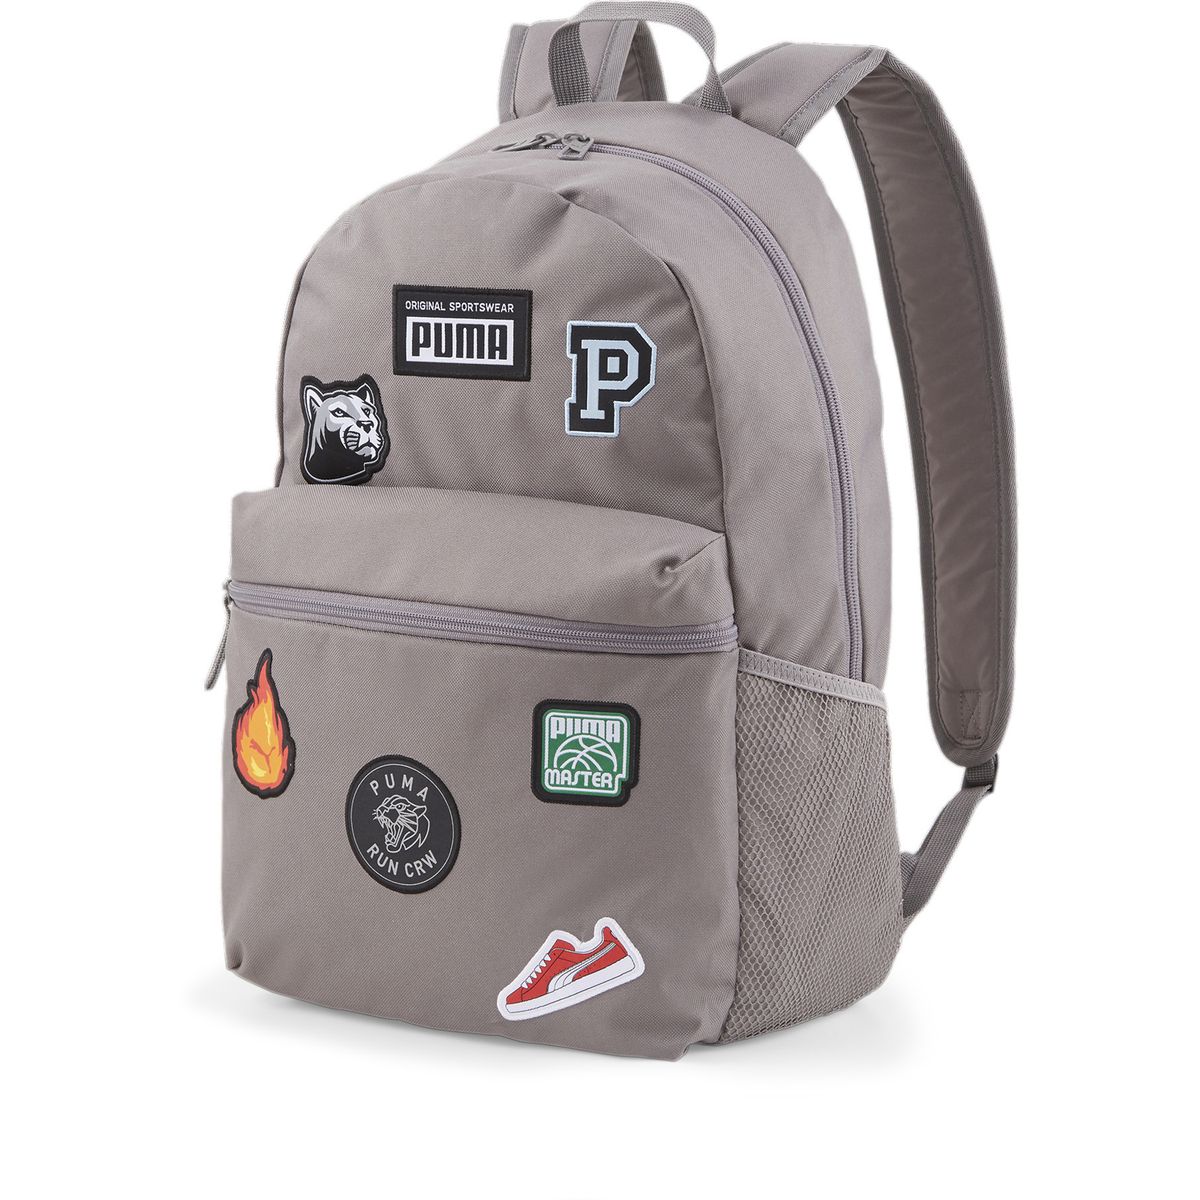 Puma Patch Backpack Daybag